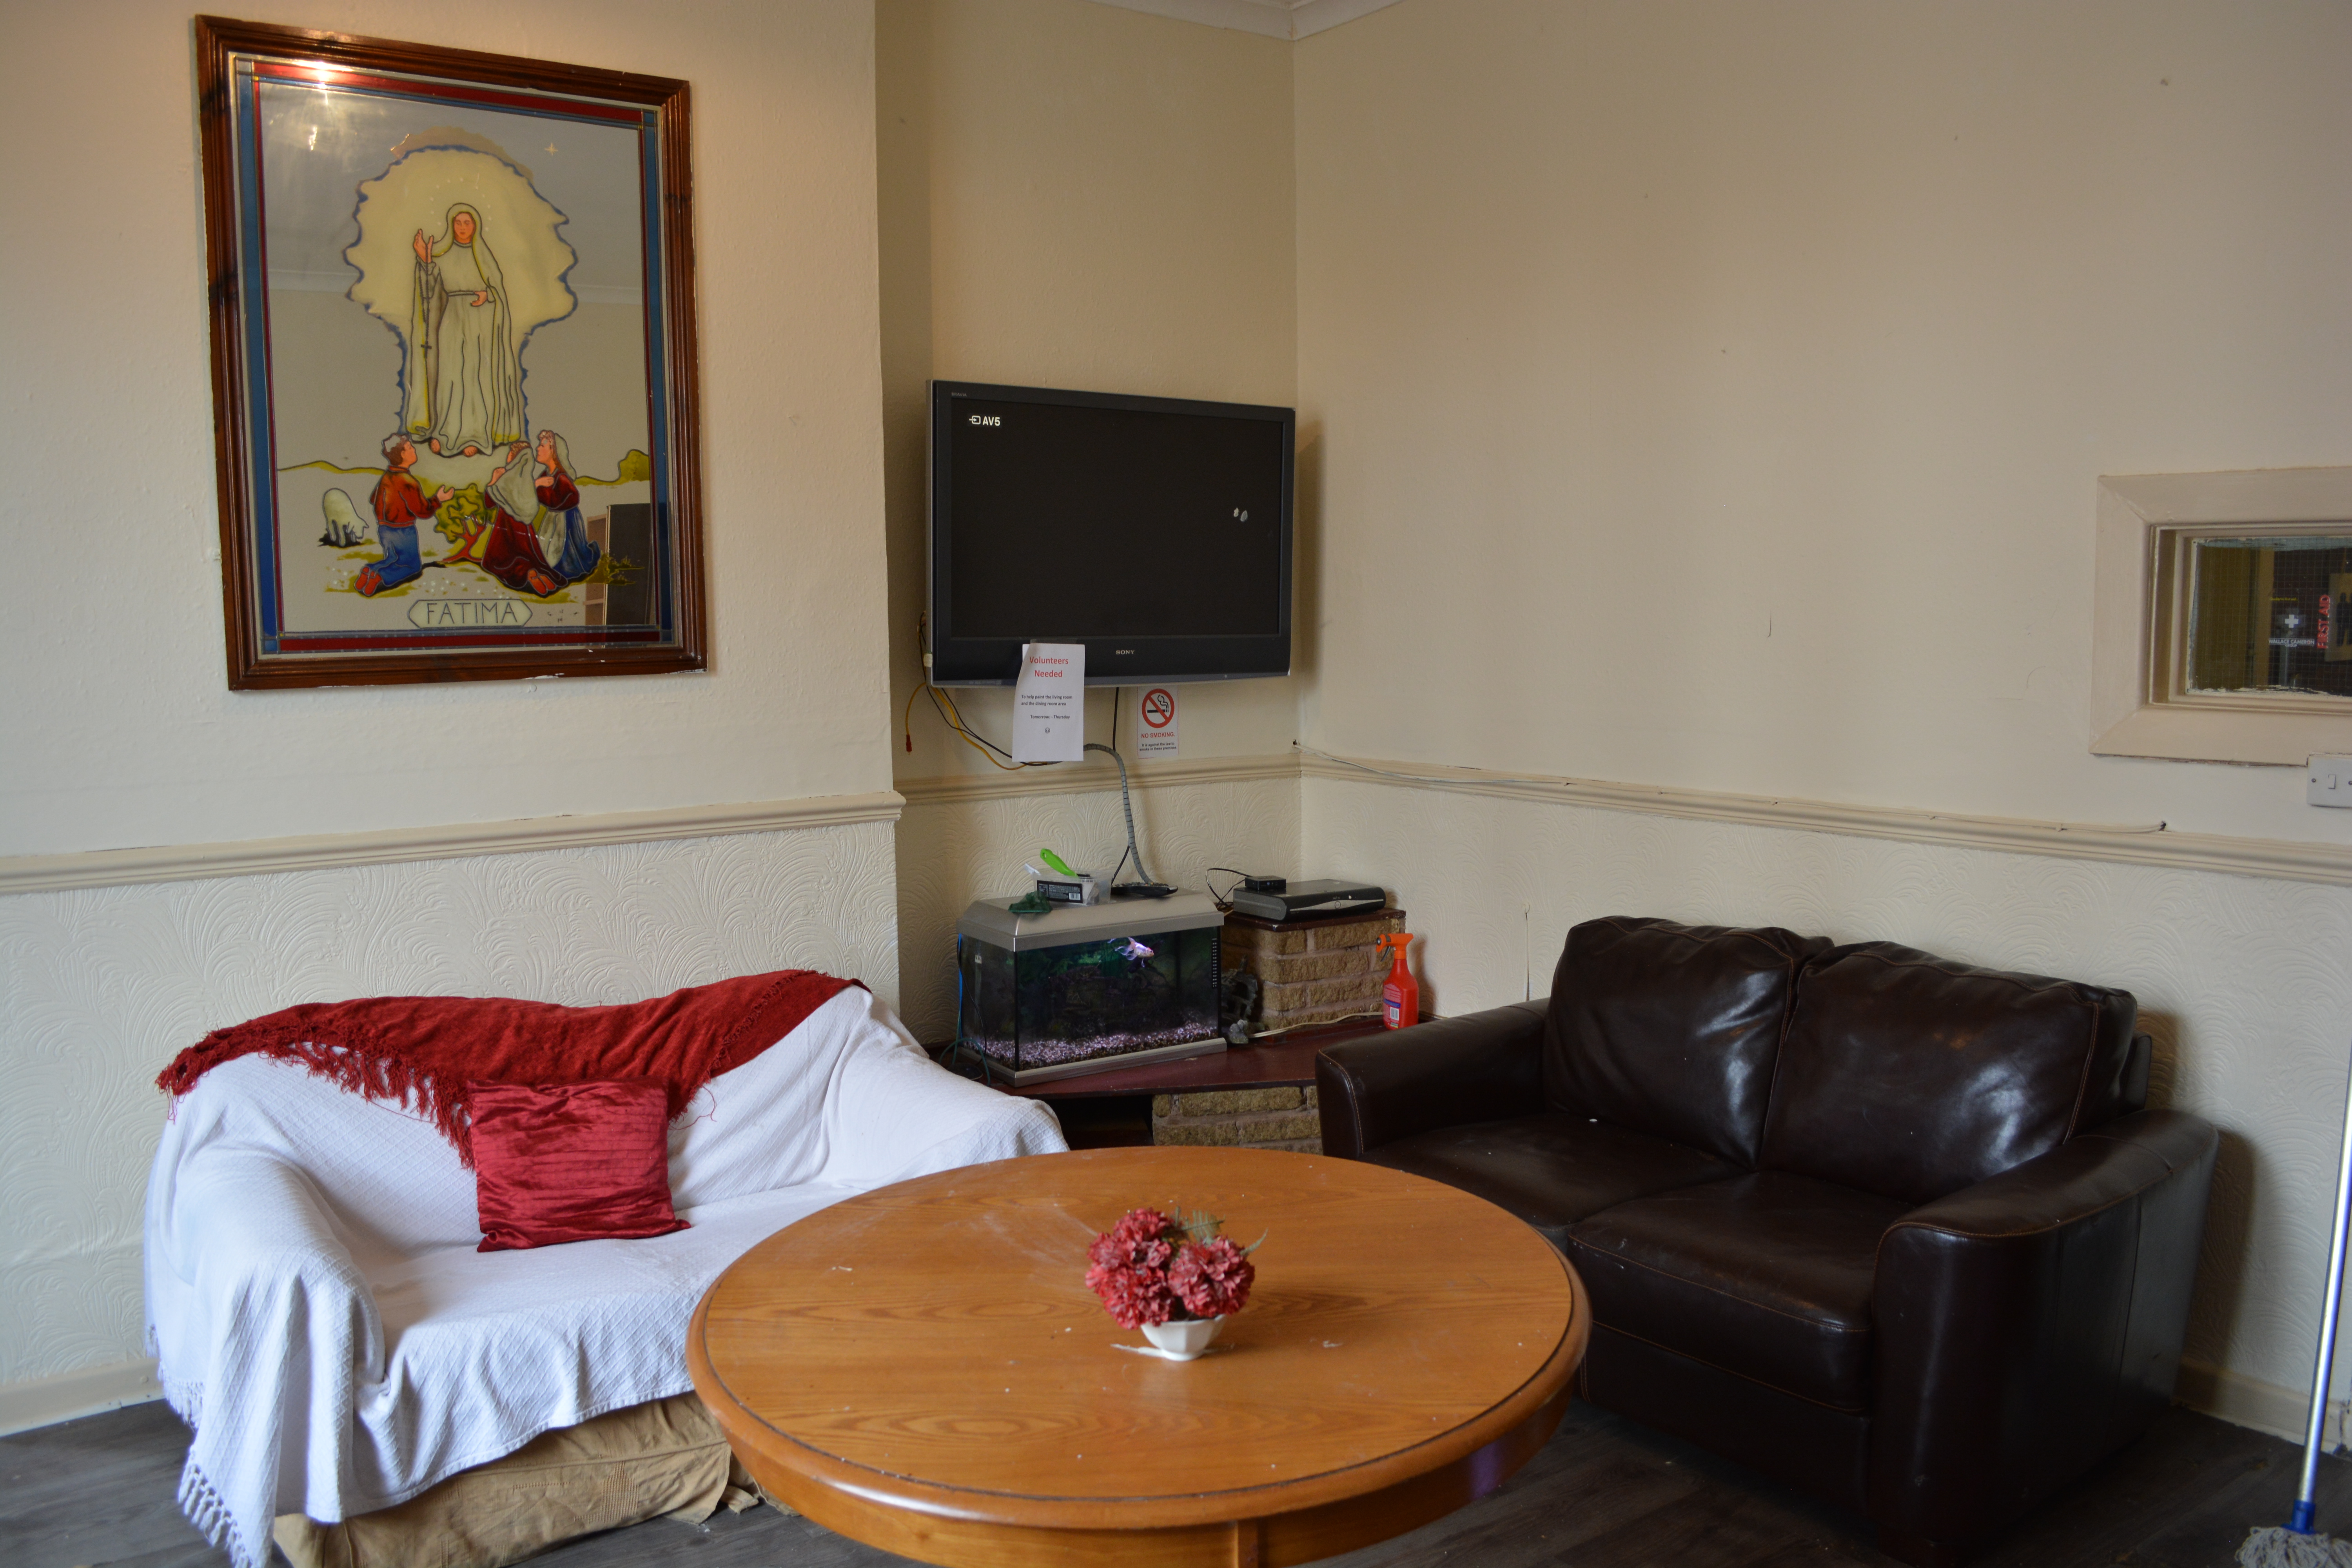 Afterredecoration of living area at Community RePaint Sandwell and Soho.